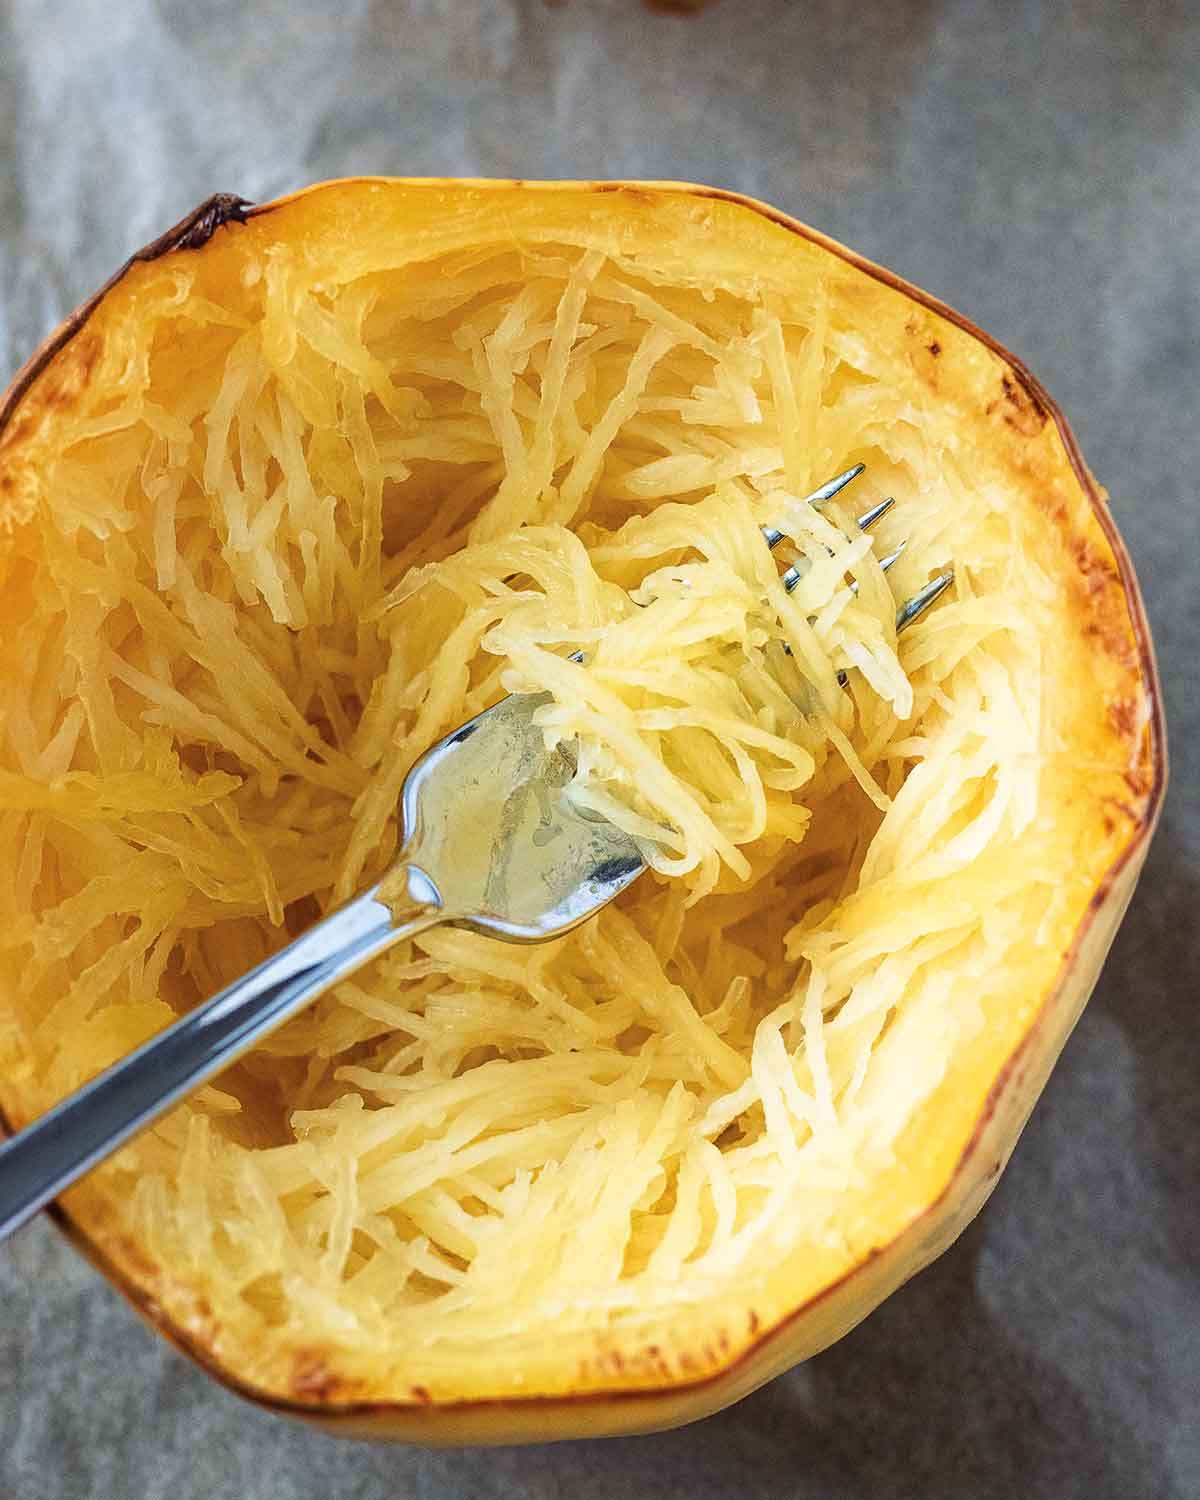 A fork scooping strands of roasted spaghetti squash from the center of a halved squash.